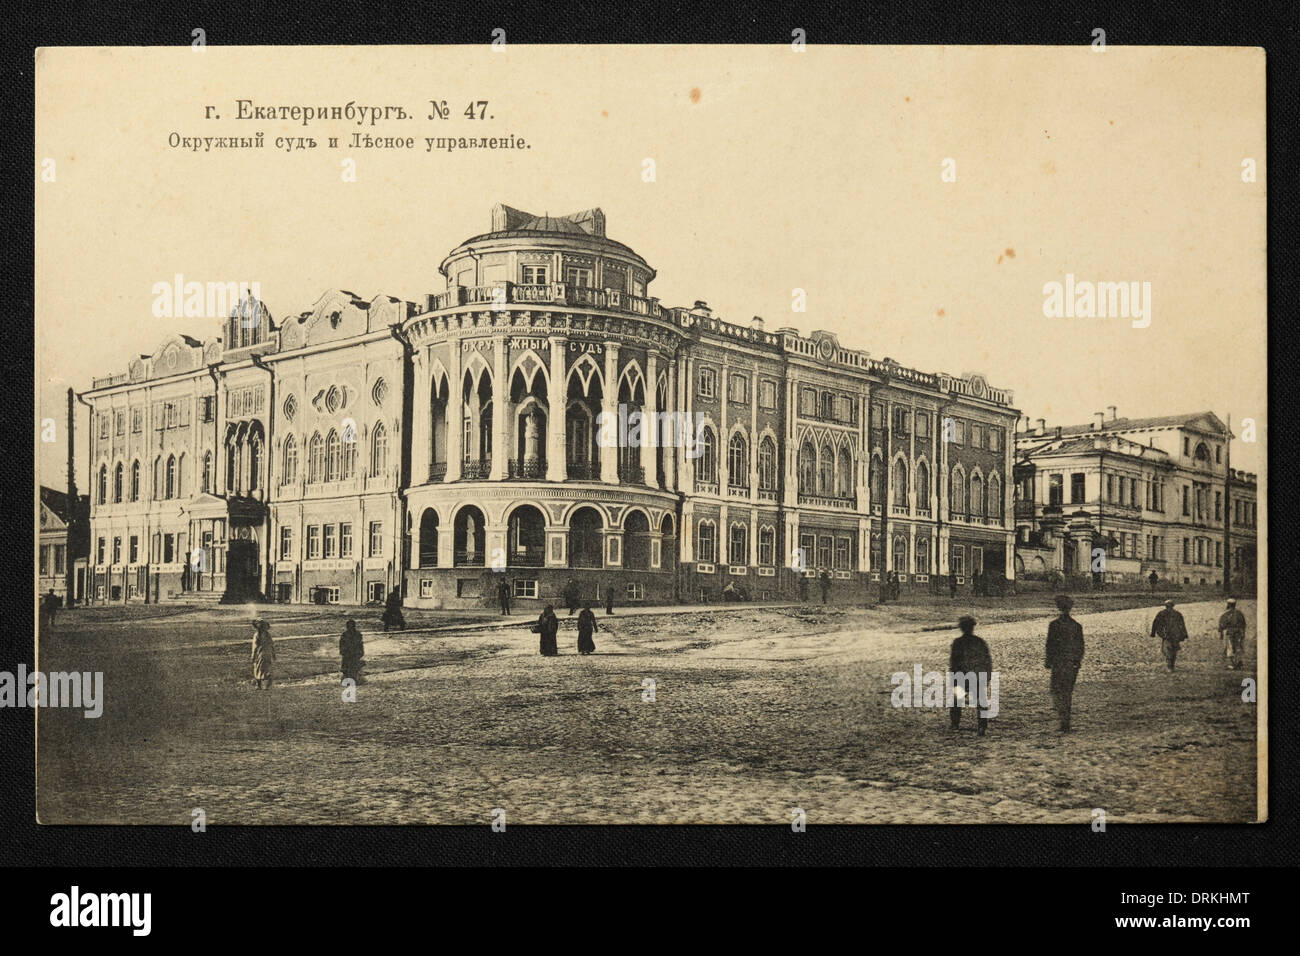 District Court also known as Sevastianov House in Yekaterinburg, Russian Empire. Black and white vintage photograph by an unknown photographer dated from the beginning of the 20th century issued in the Russian vintage postcard published by A.S. Suvorin, Yekaterinburg. Text in Russian: Yekaterinburg. The District Court and the Forest Administration. The District Court also known as Sevastianov House or the Trade Union House is the architectural monument from the 19th century now served as one of the official residences of Russian president. Courtesy of the Azoor Postcard Collection. Stock Photo